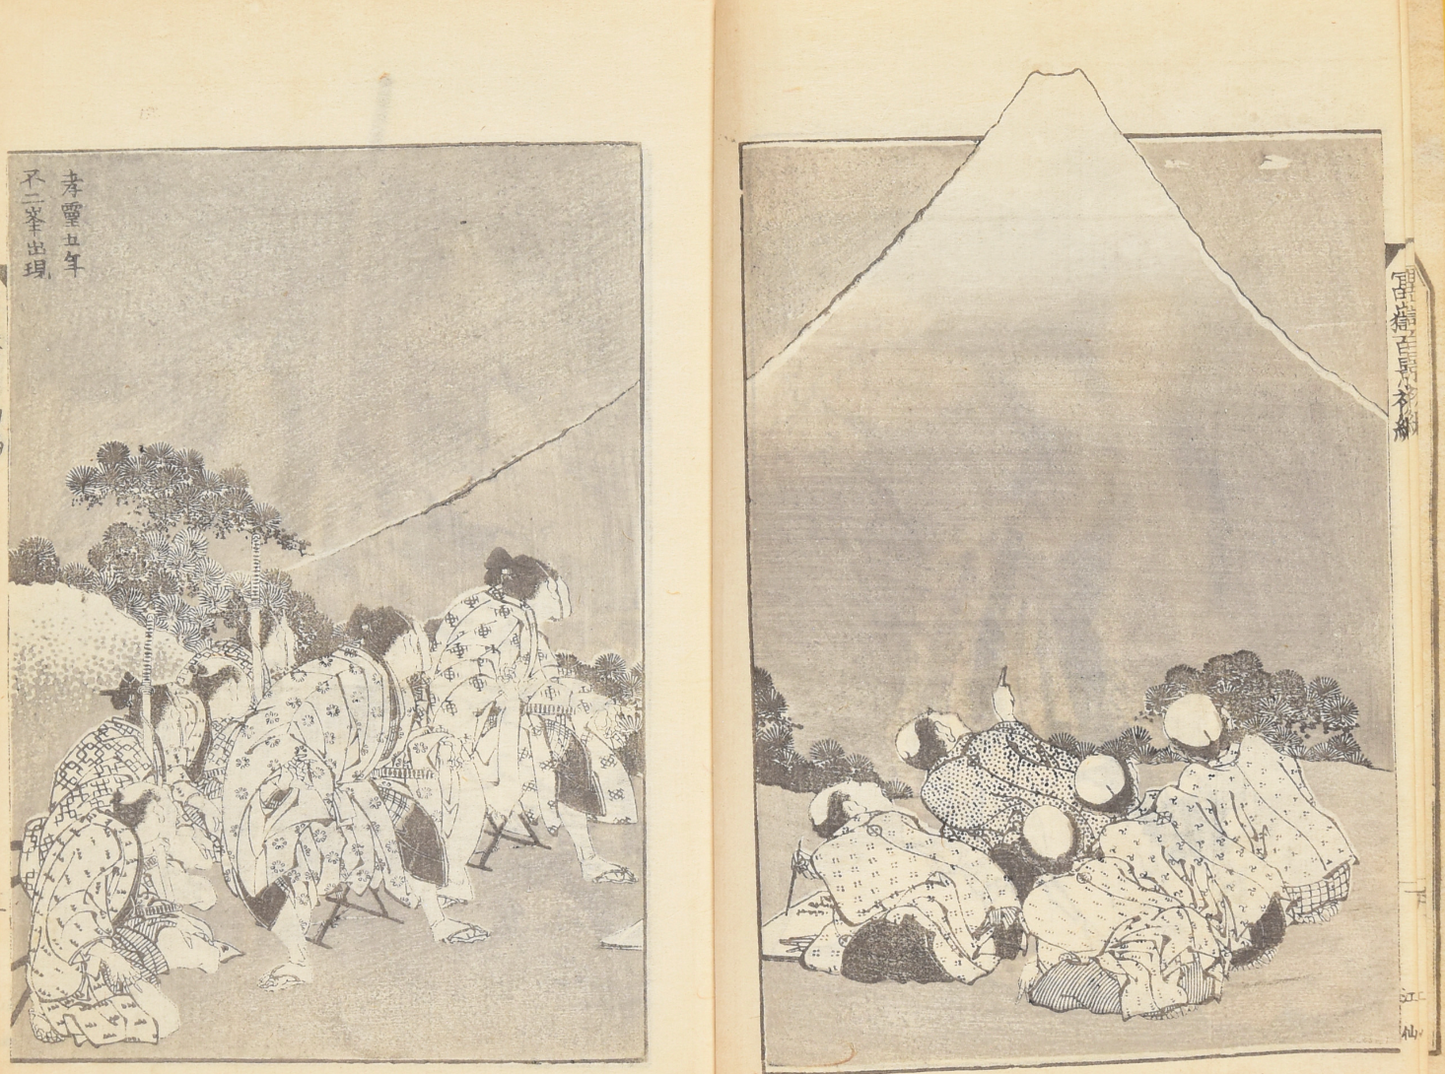 Hokusai - One Hundred View of Fuji 1834 - Volume 1 - 2nd Edition from 1874